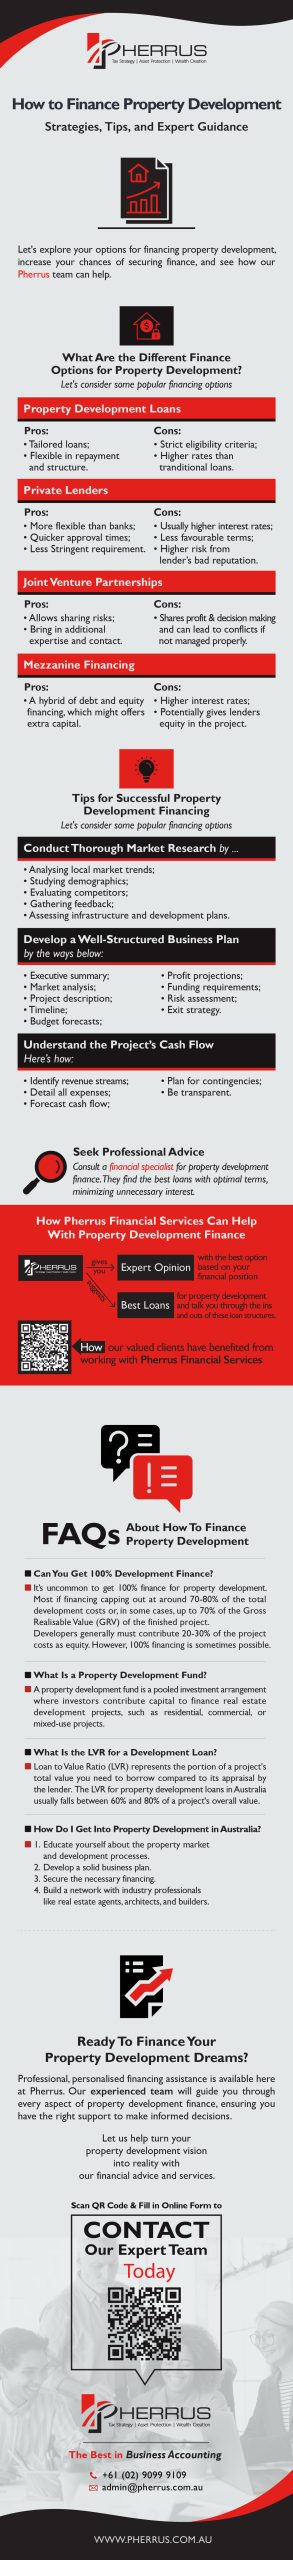 How to Finance Property Development - Infographic